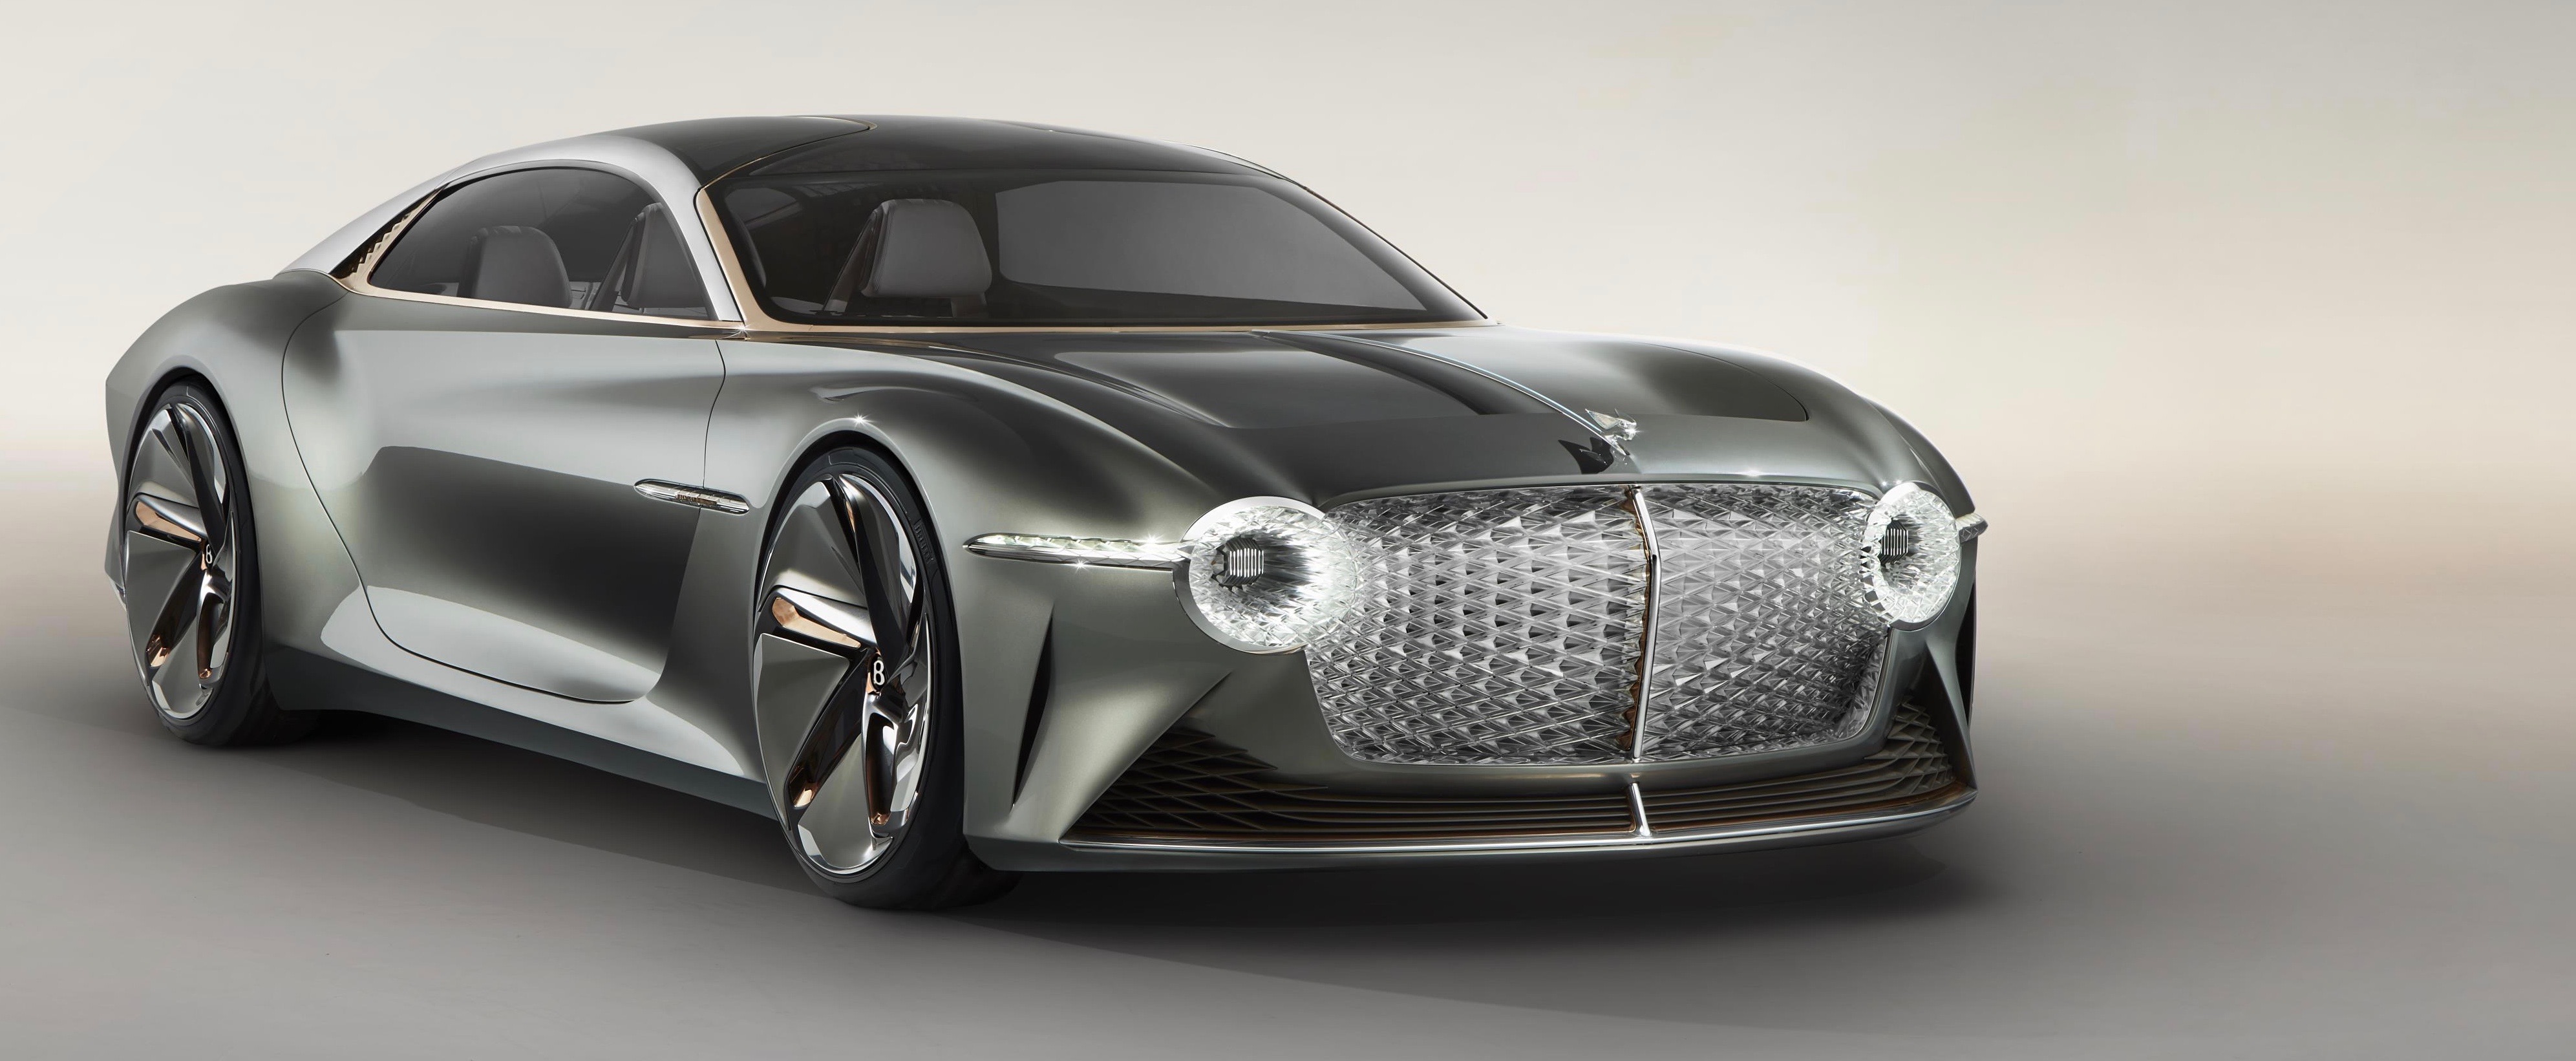 EXP 100 GT, Bentley offers ‘AR’ view of its EXP 100 GT concept car, ClassicCars.com Journal